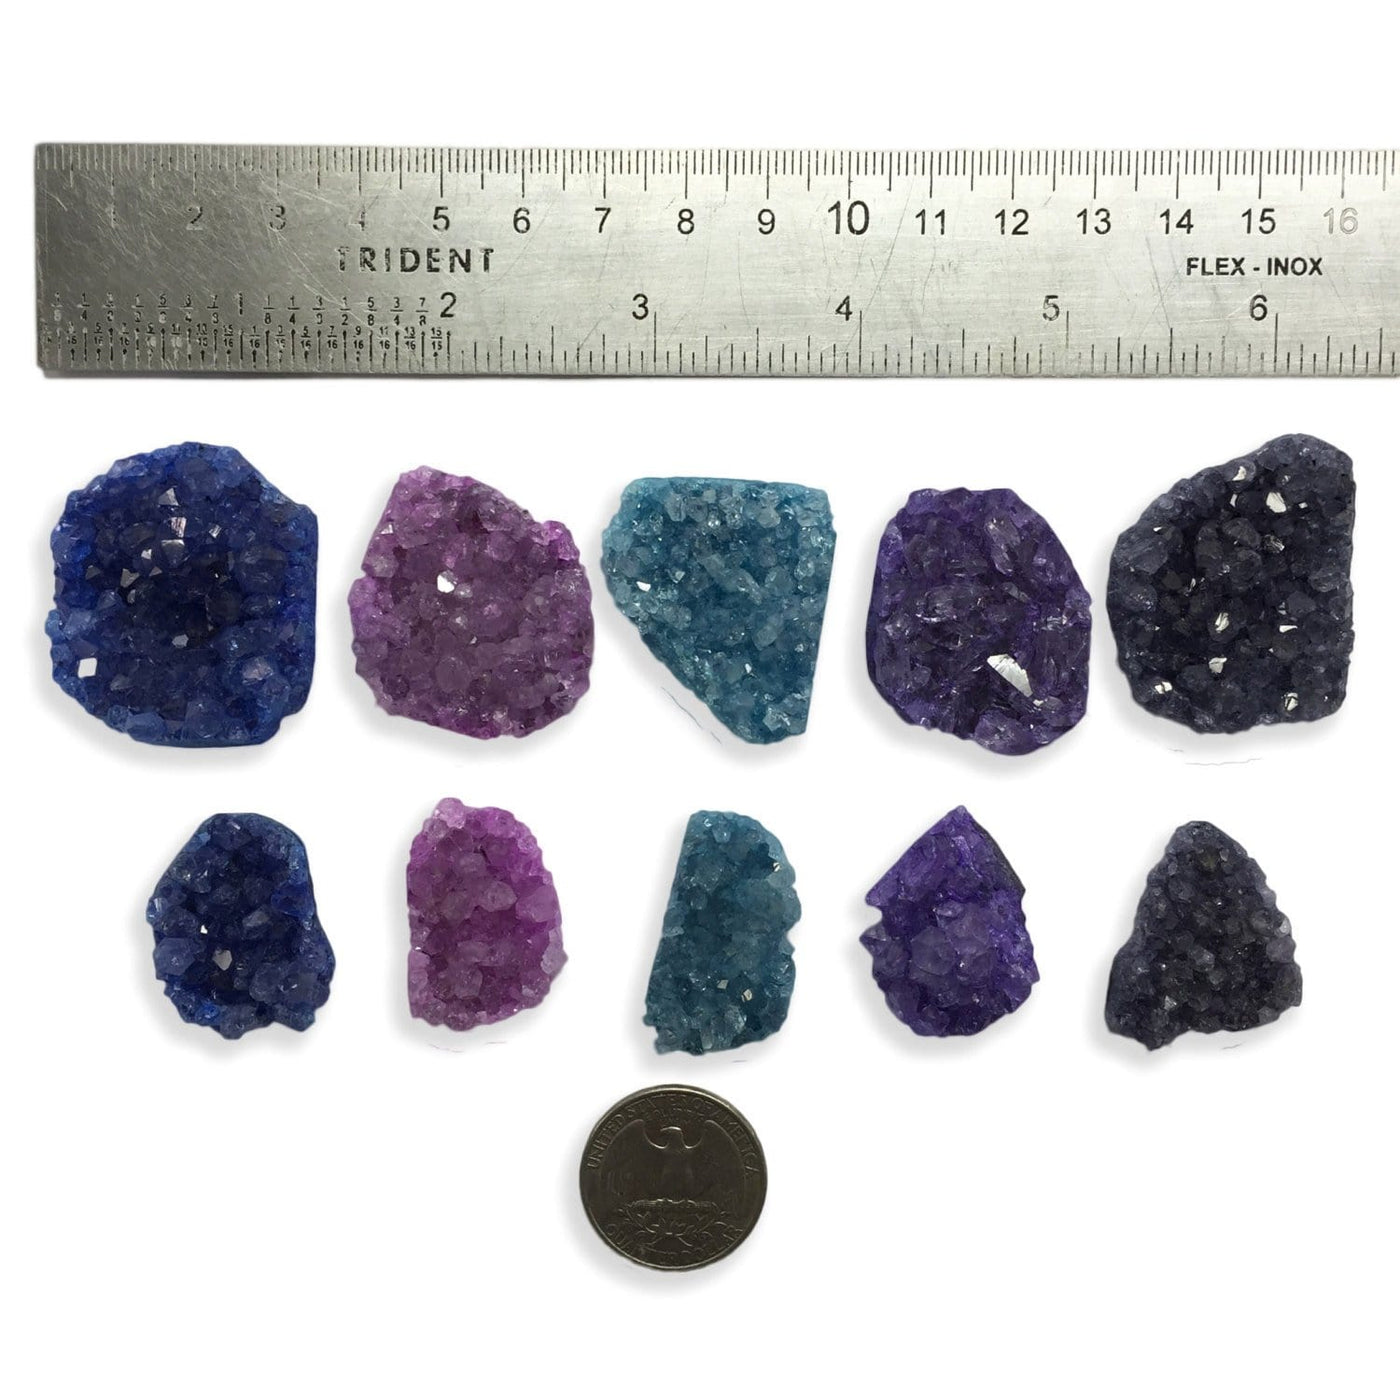 Assorted druzy in shades of blue, teal, purple, and pink on a white background with a ruler next to them showing they are from half an inch to an inch.